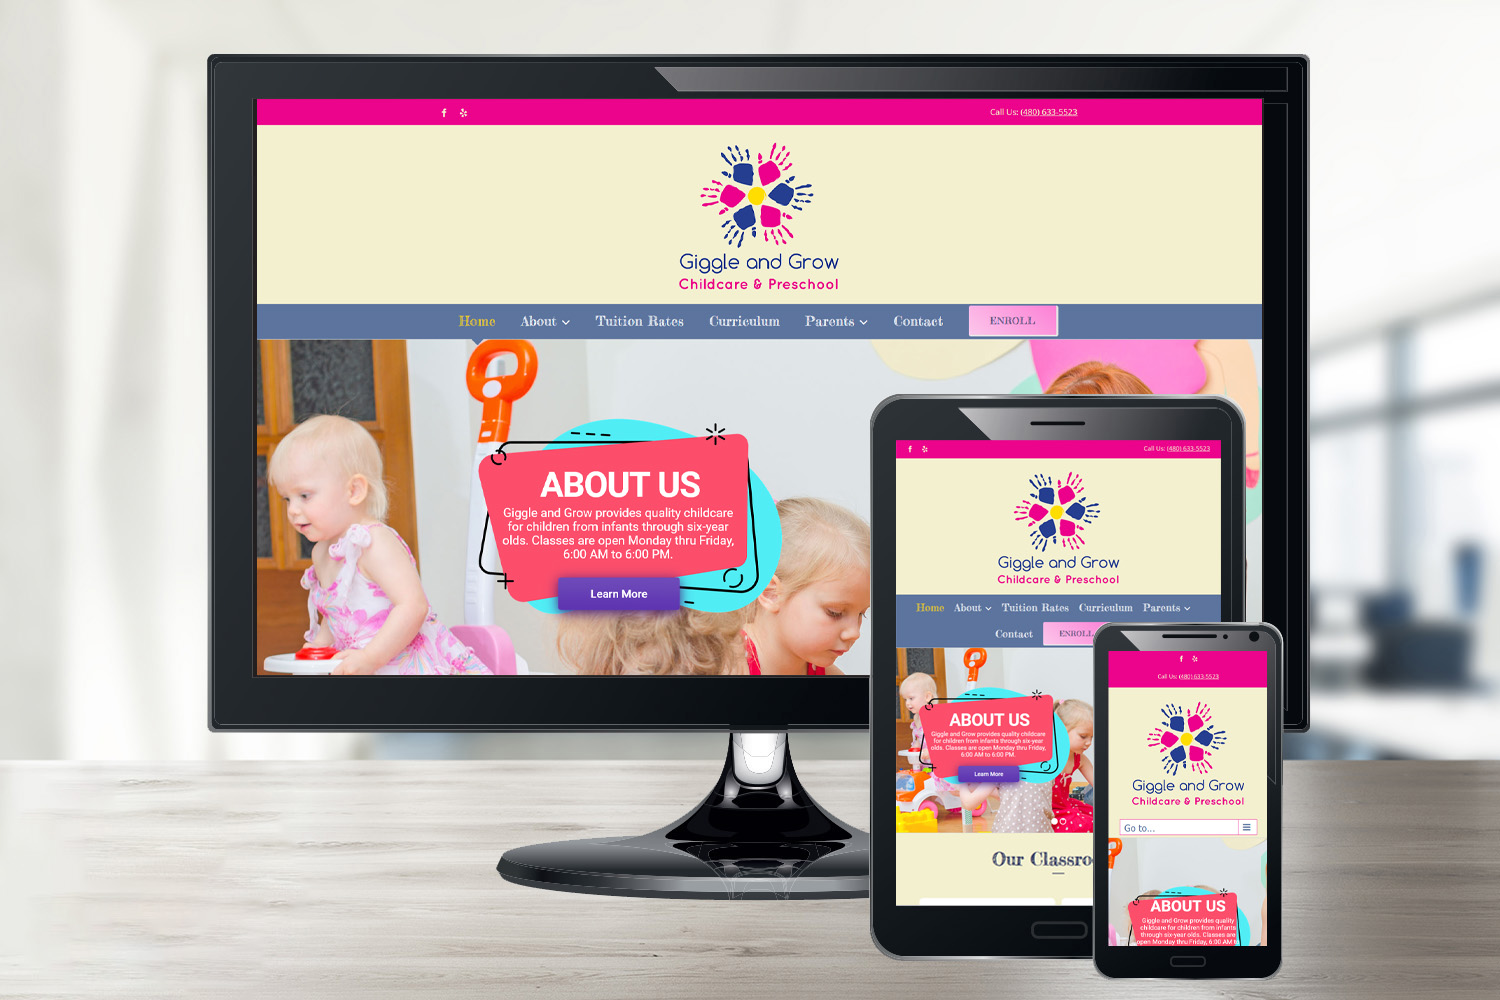 Giggle and Grow Childcare & Preschool website shown on responsive platforms